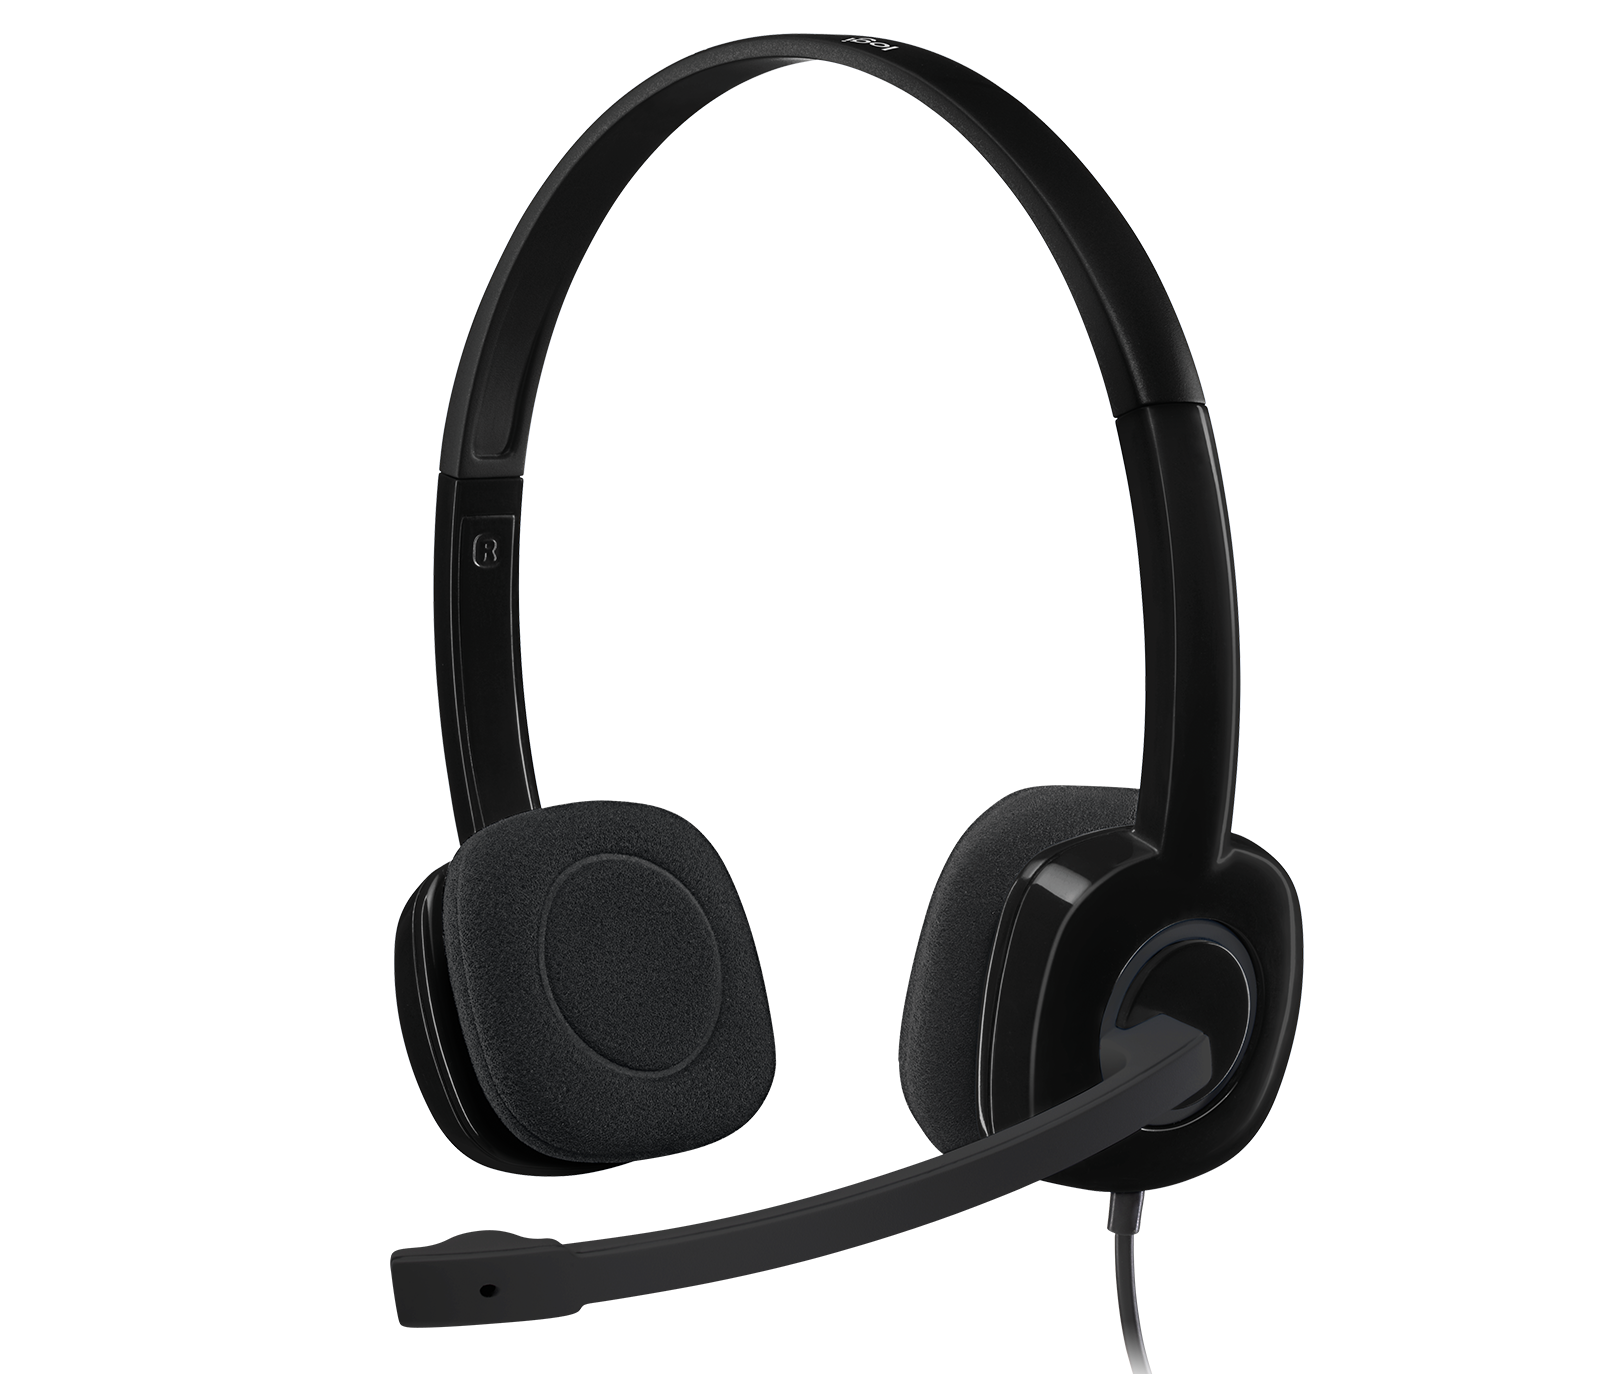 H151 Stereo Headset Multi-device headset with in-line controls - Black